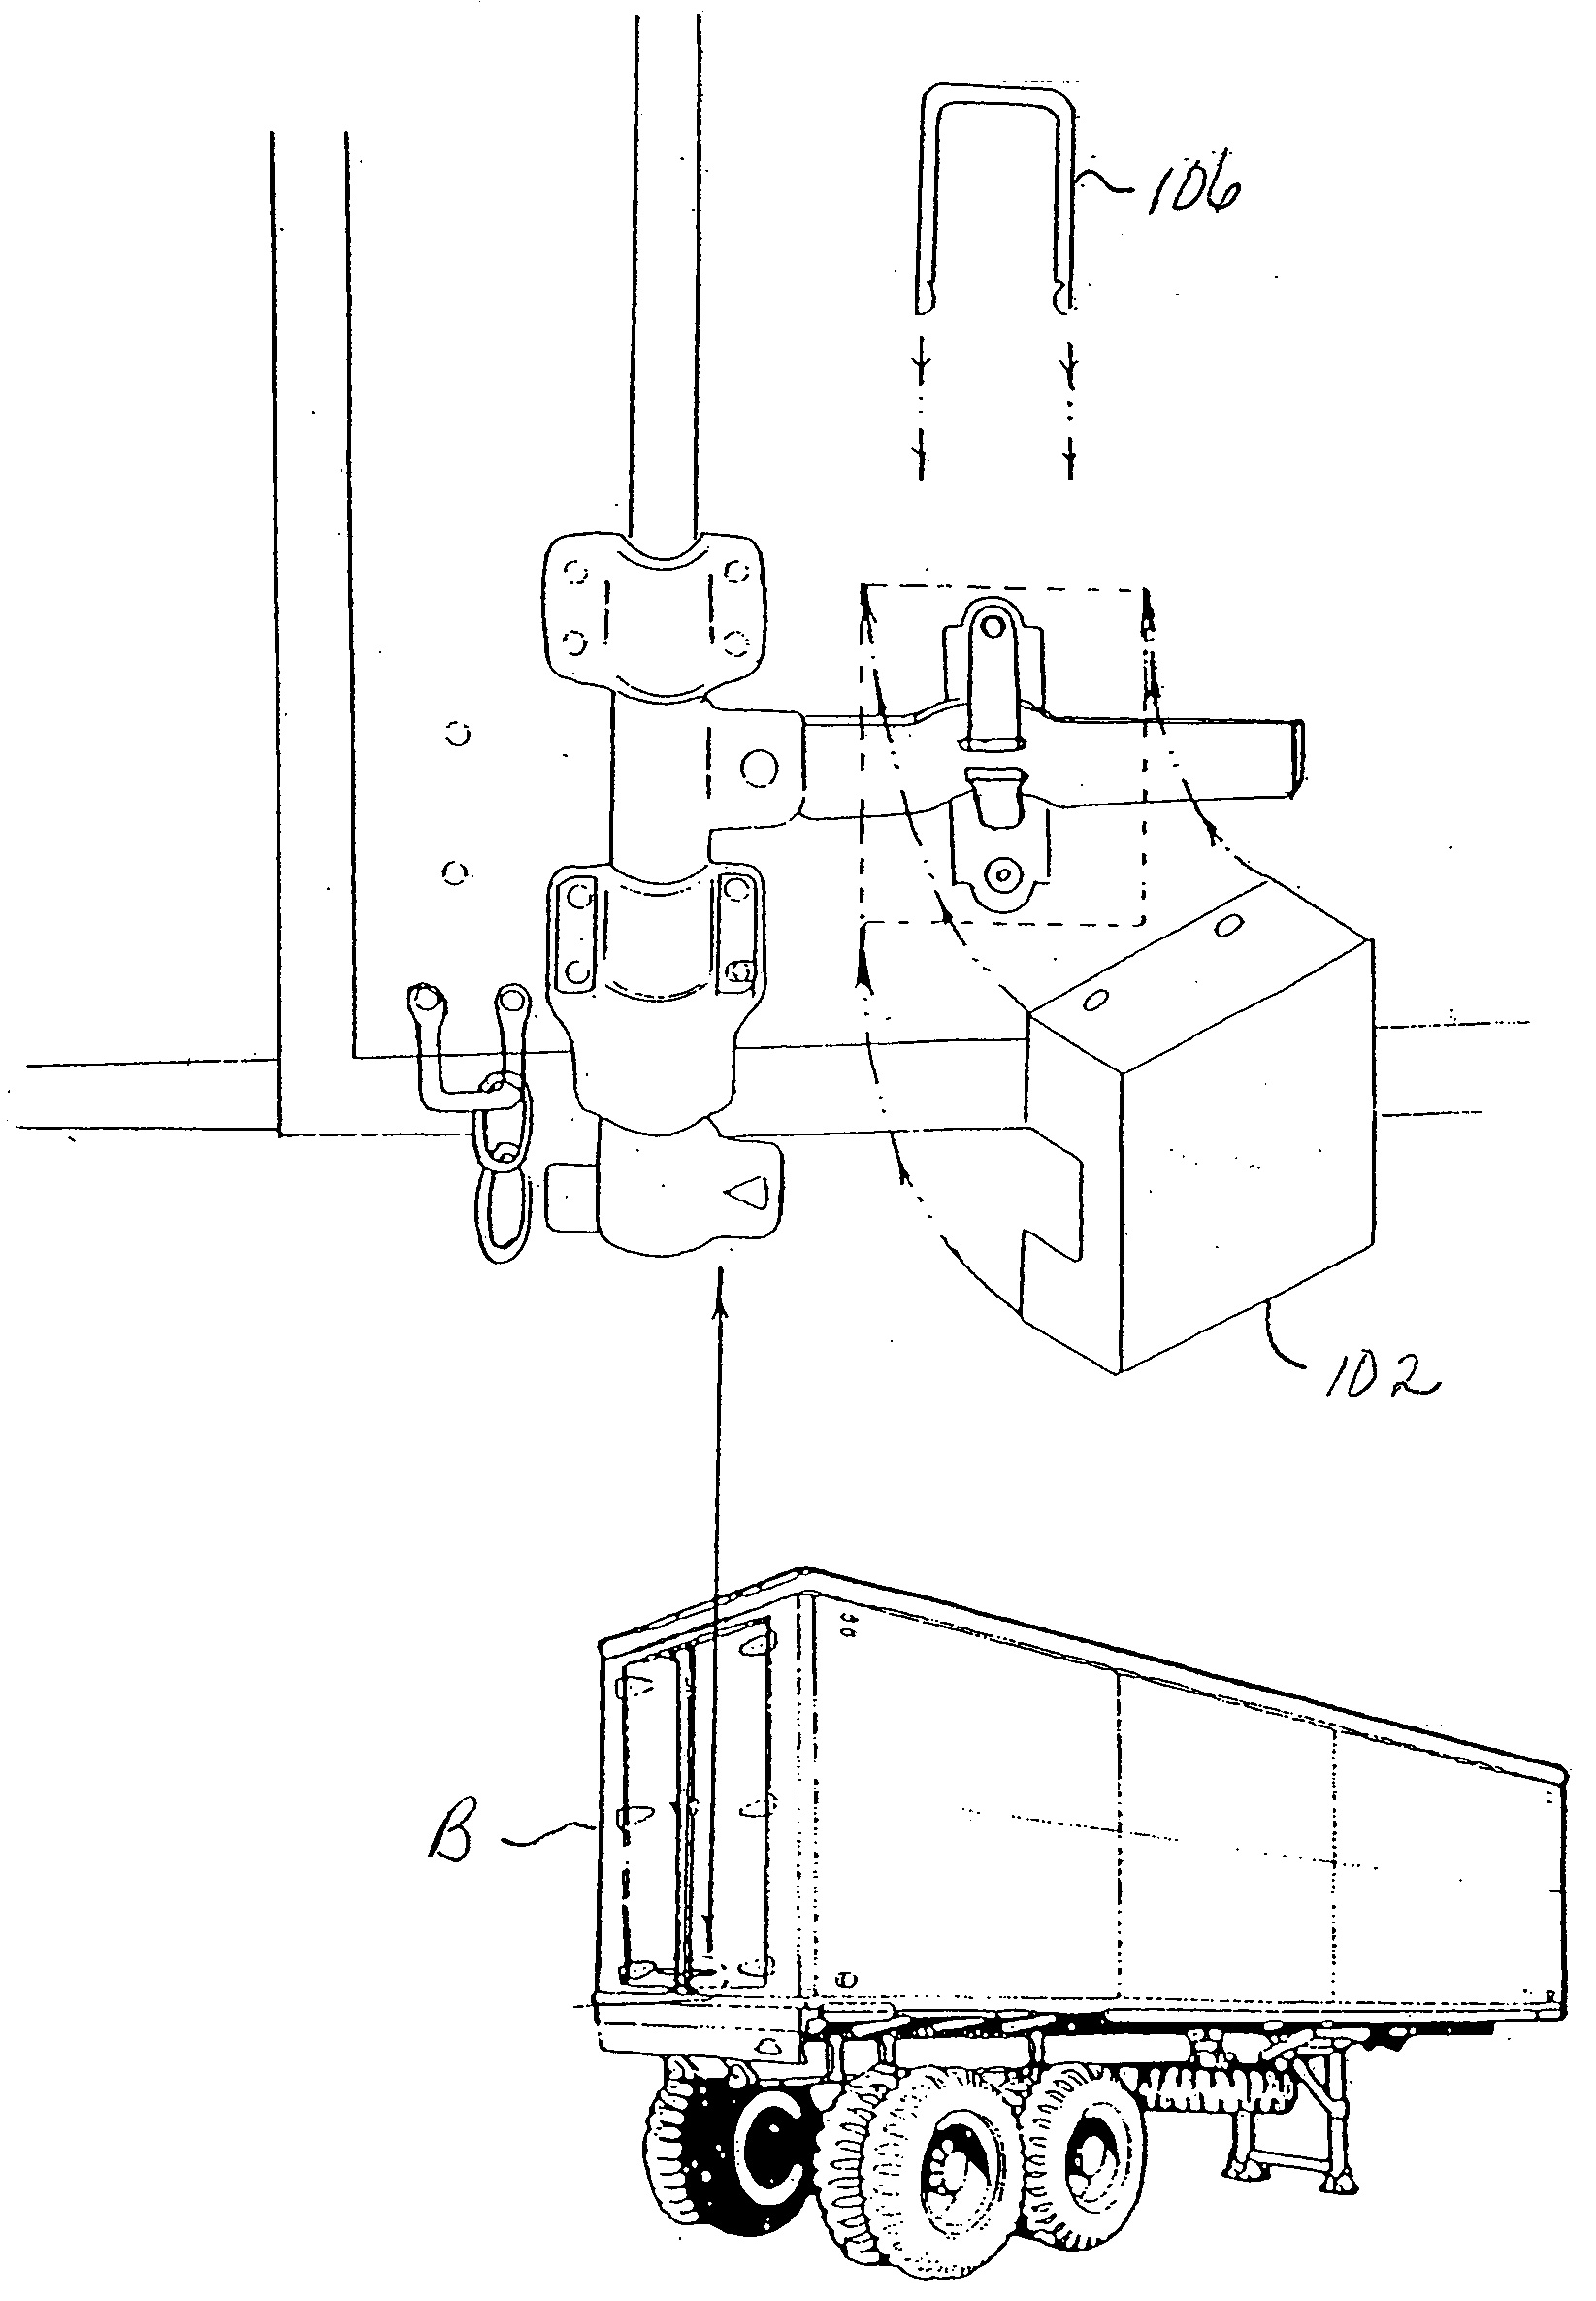 Locking device and method for securing cargo containers during transport and storage that permits secure inspection of any authority seal